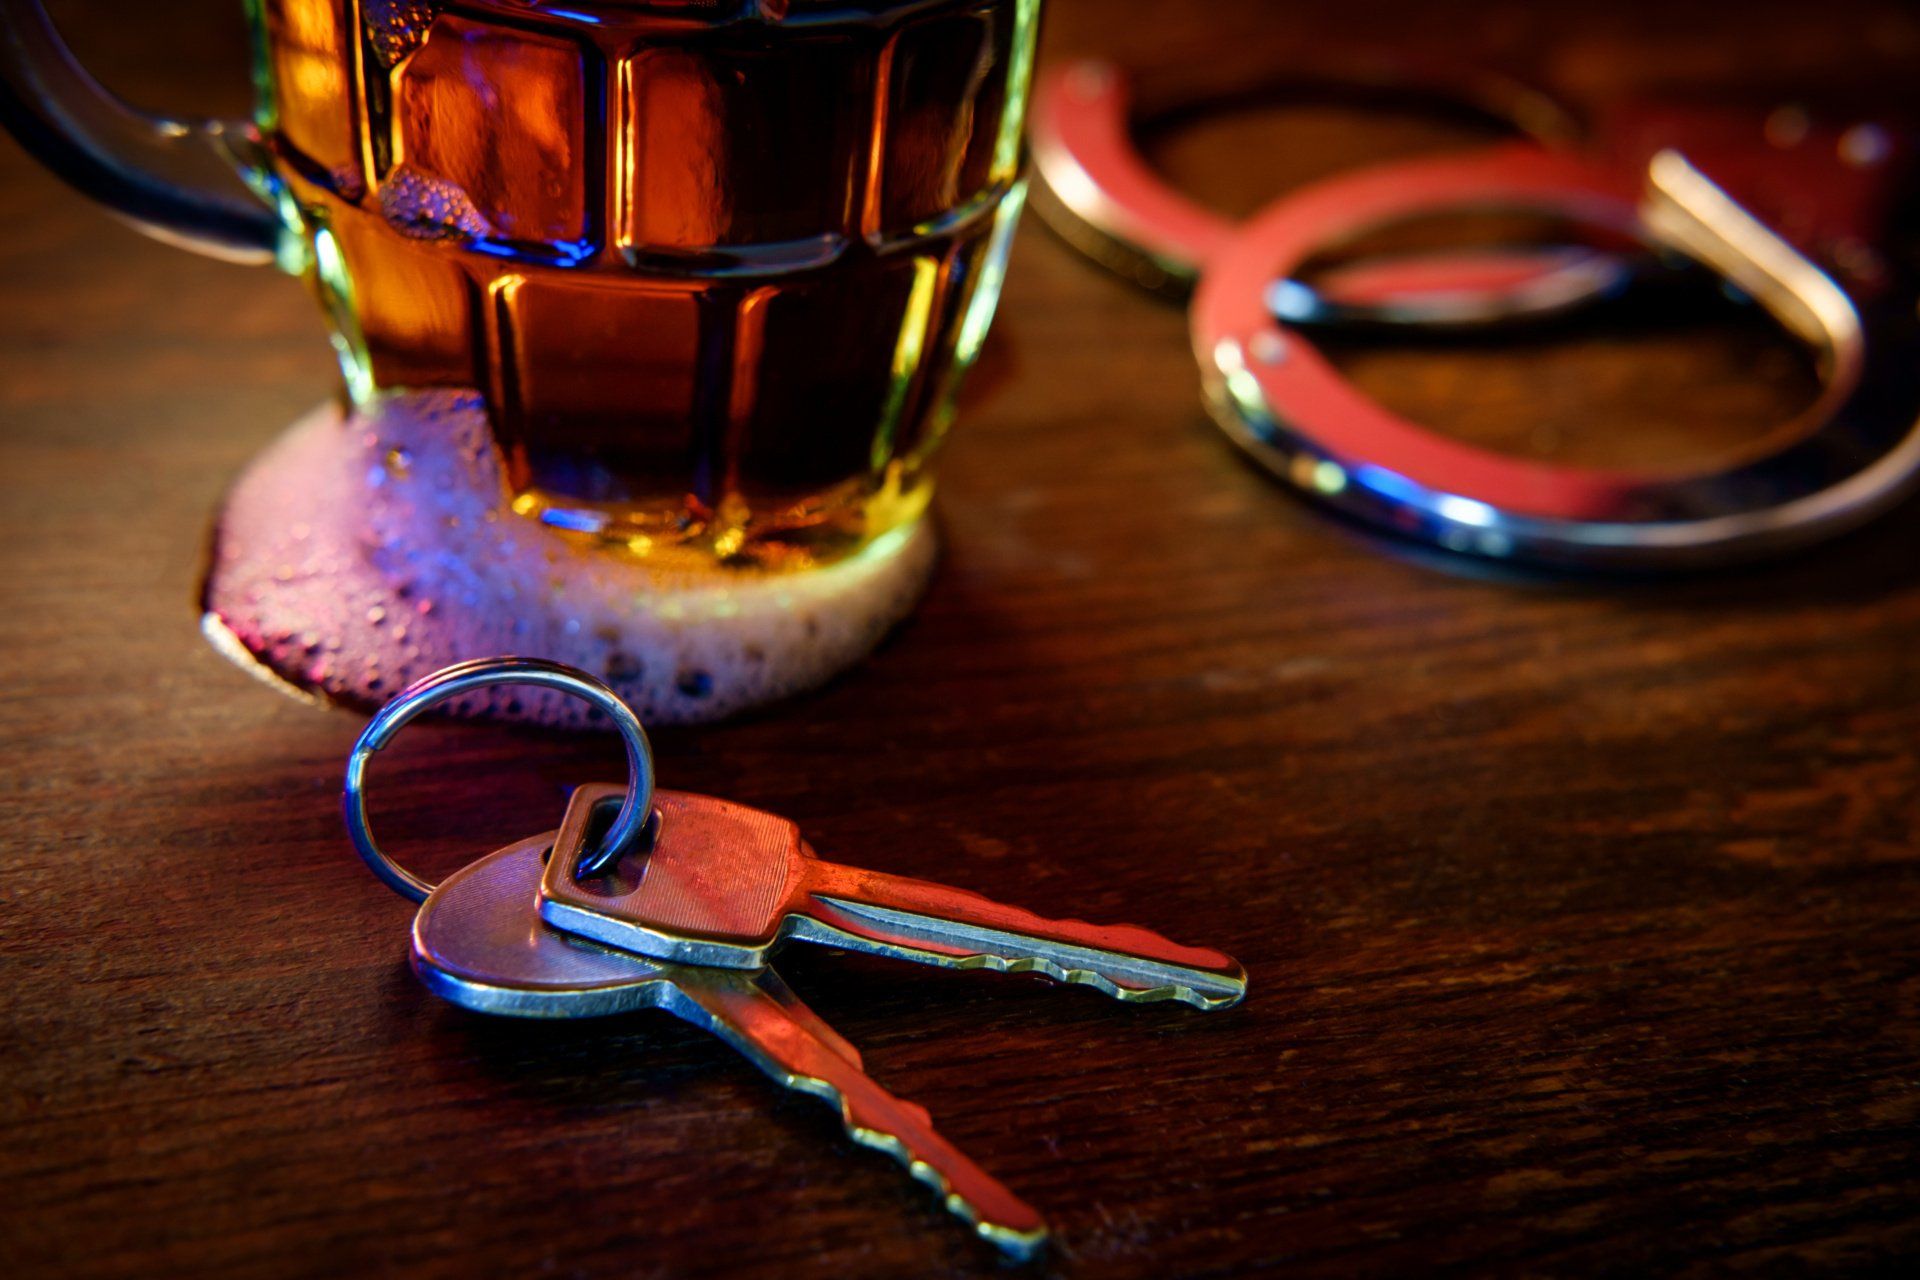 alcohol, keys and handcuffs on a table